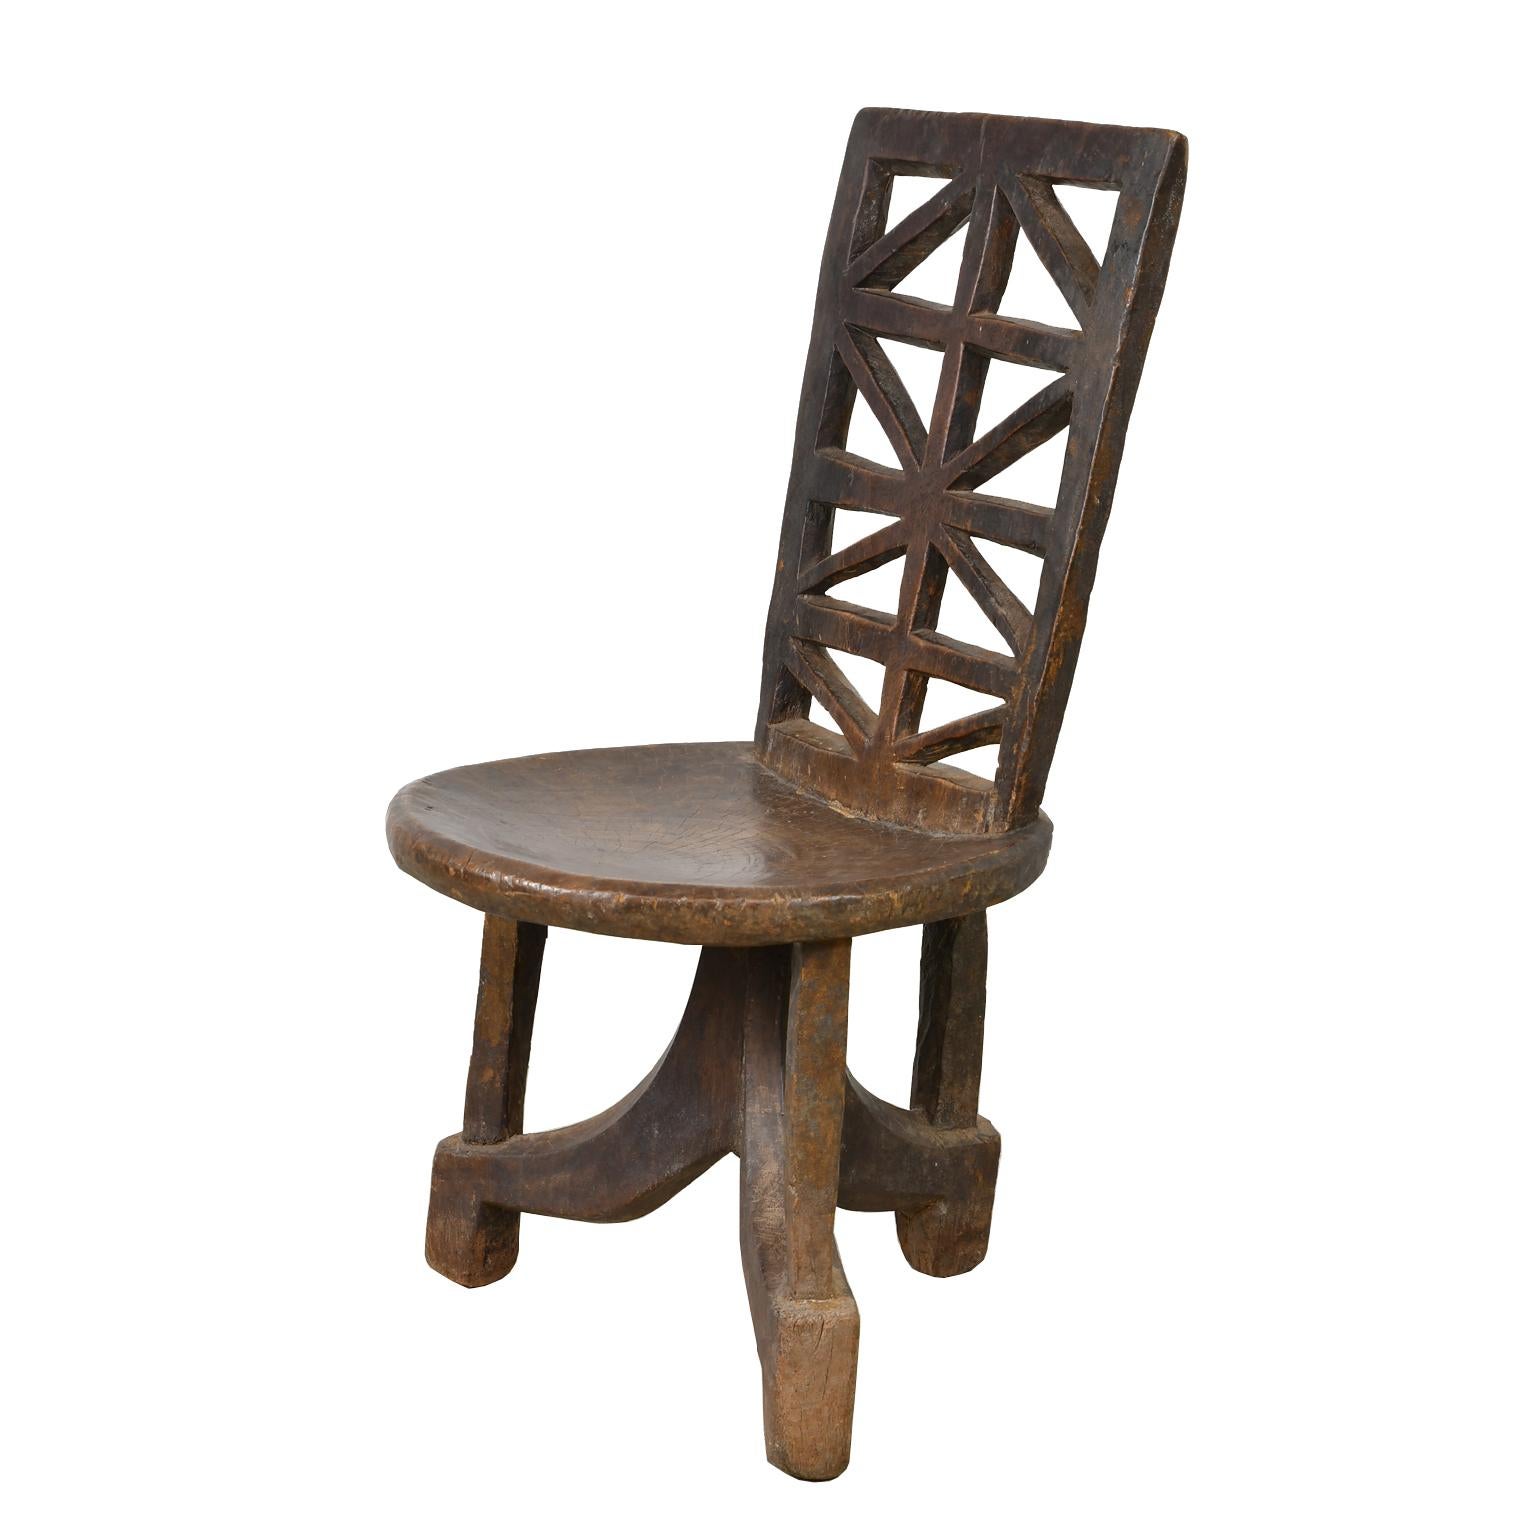 This beautiful tribal chair is carved from one piece of wood and was traditionally reserved for the chief of the village. It is distinctive with its three legs and its high back which is carved in a traditional geometric design. Ethiopia, Africa,